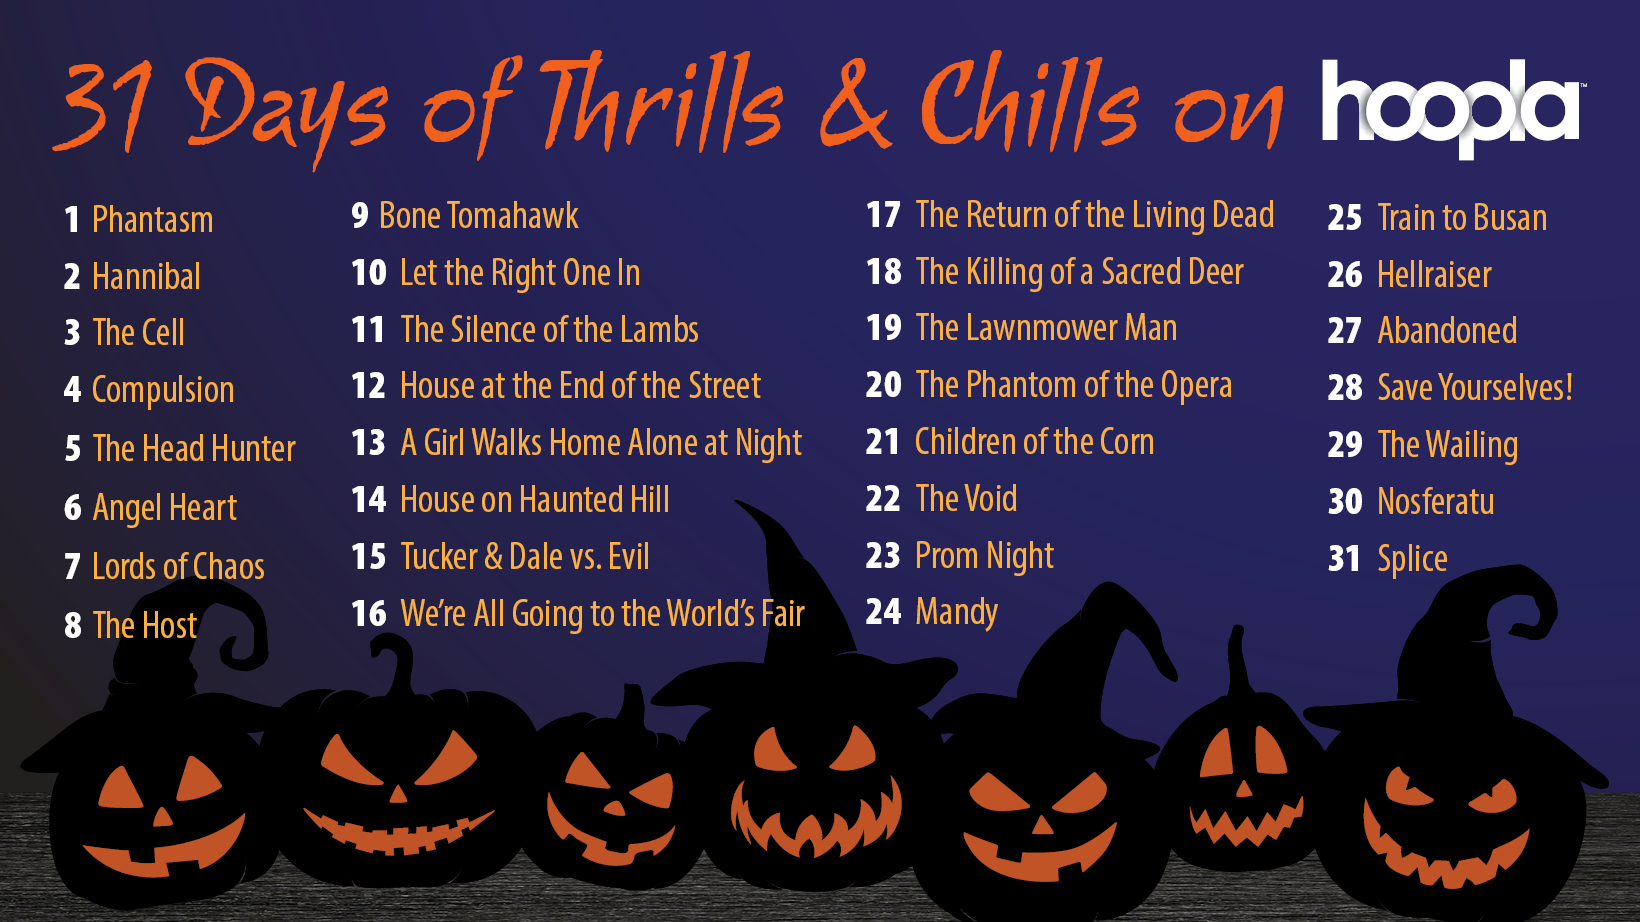 31 days of thrills and chills on hoopla